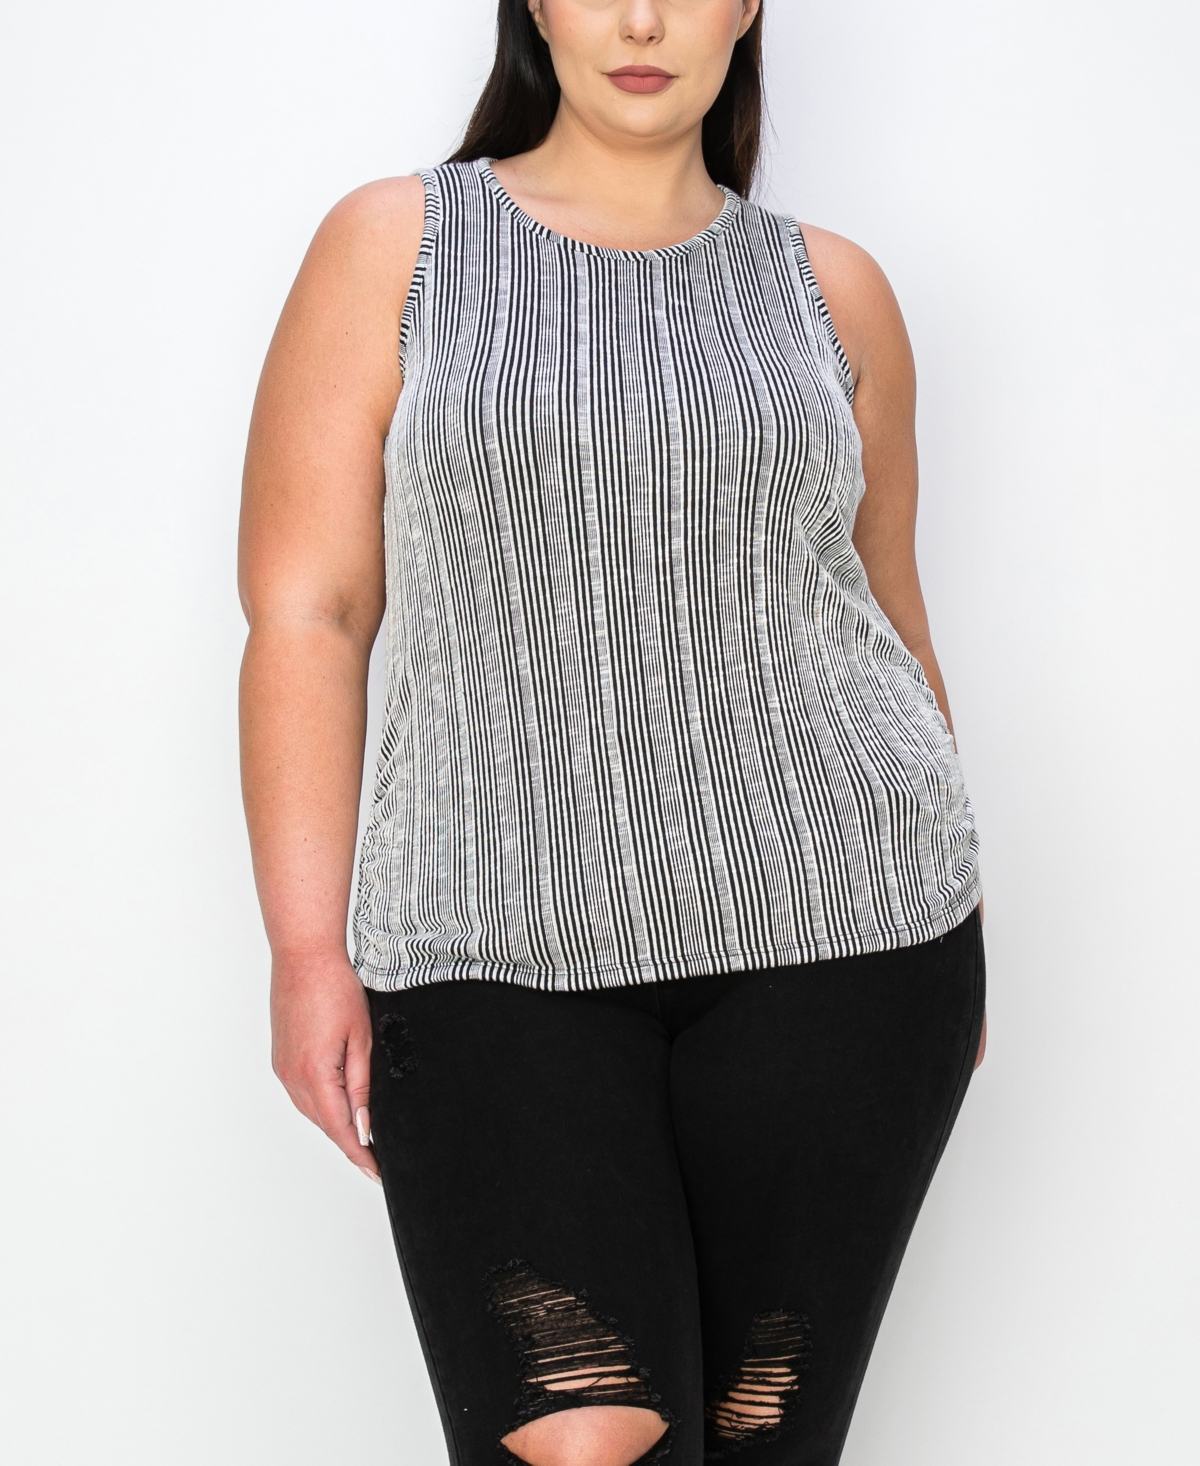 Plus Size Variegated Textured Stripe Ruched Tank Top - Black Ivory